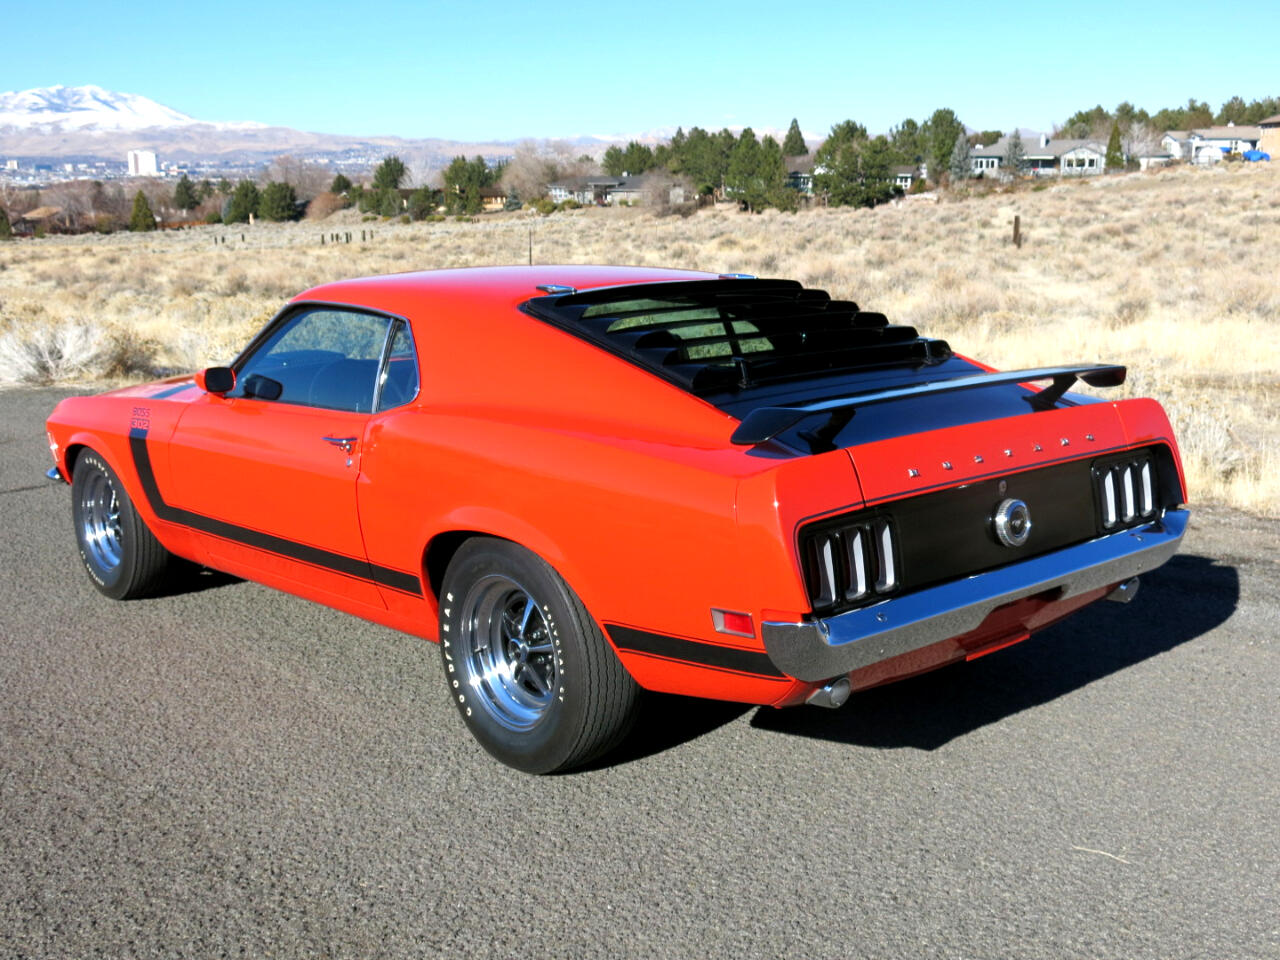 Used 1970 Ford Mustang Boss 302 for Sale in Las Vegas NV 89118 Cool ...